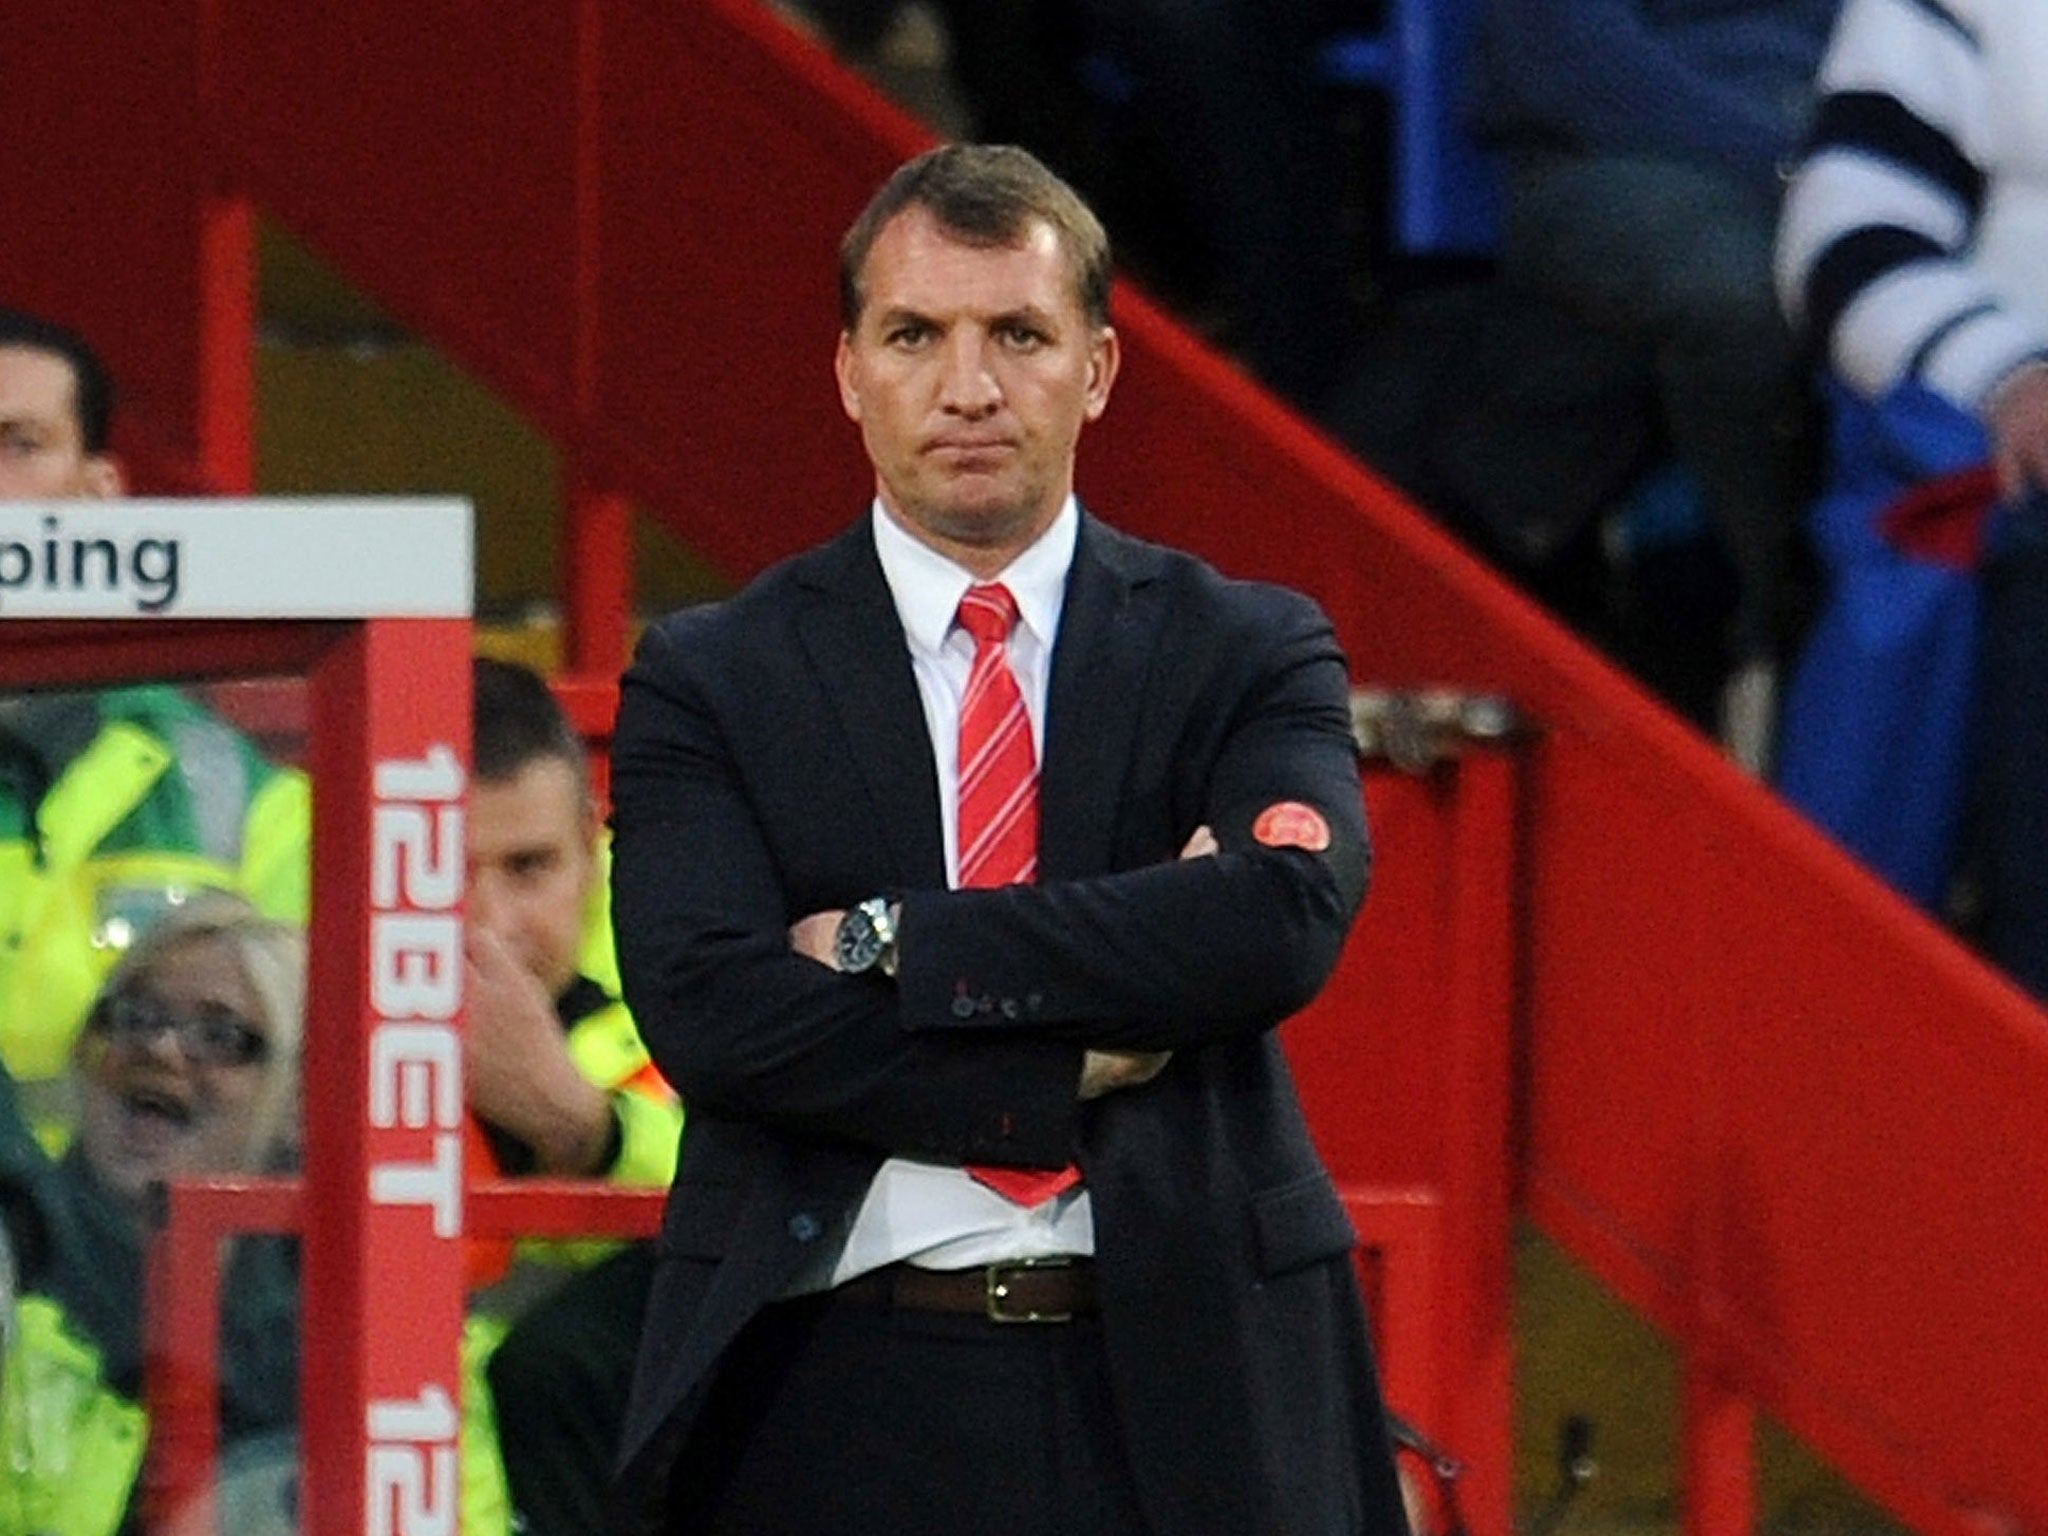 Brendan Rodgers believes Liverpool will learn from this season